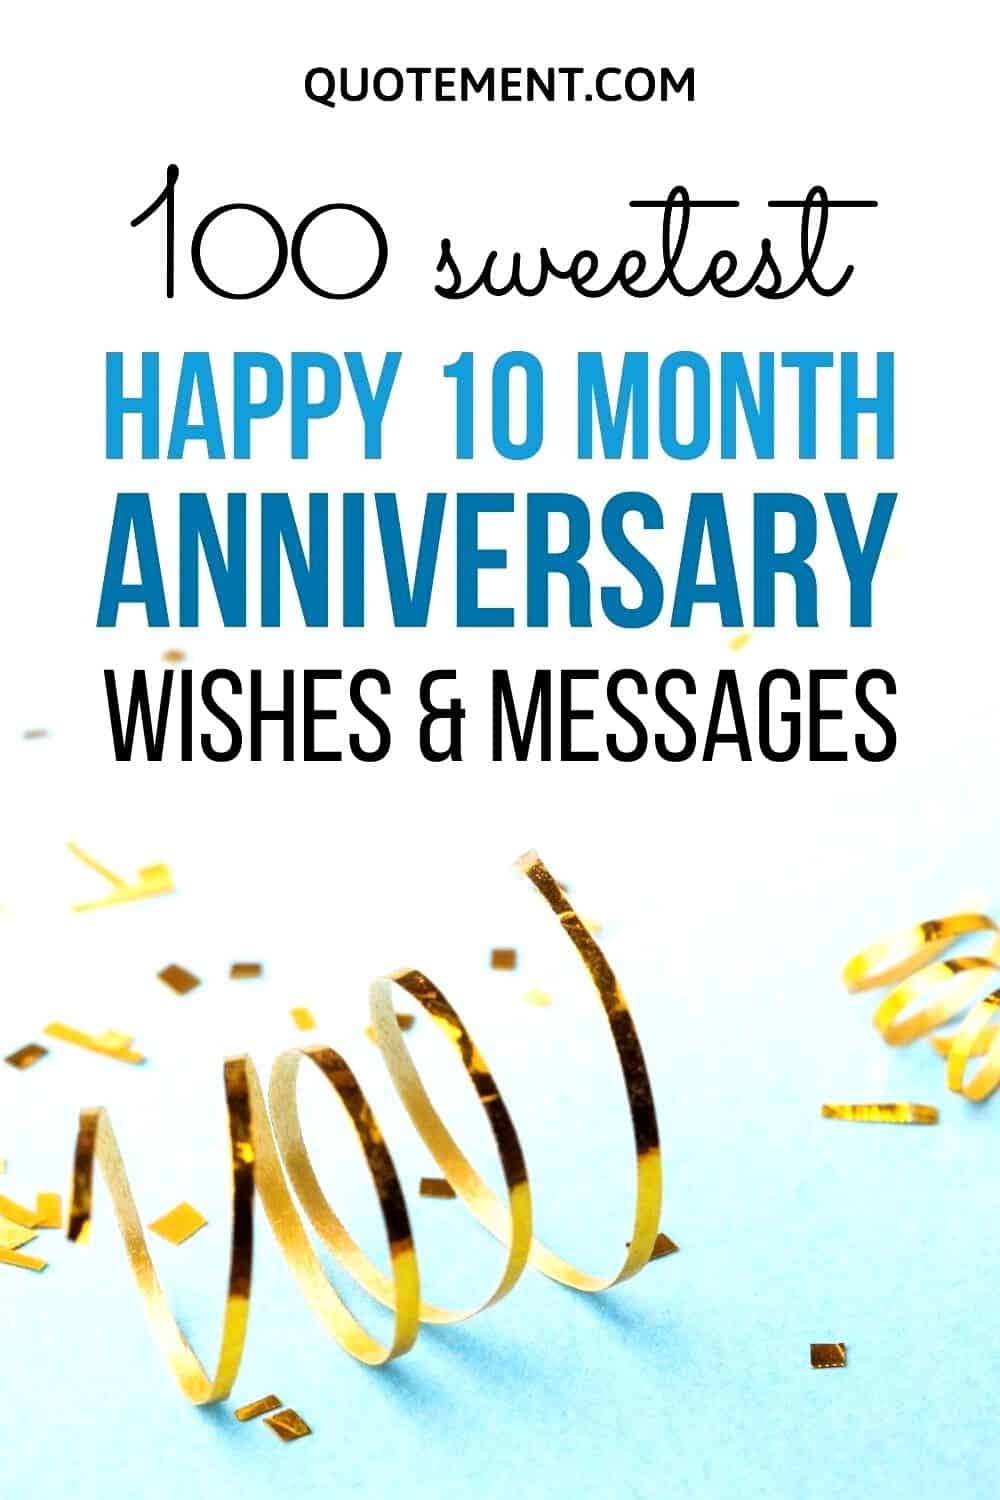 100 Sweetest Happy 10 Month Anniversary Wishes & Messages